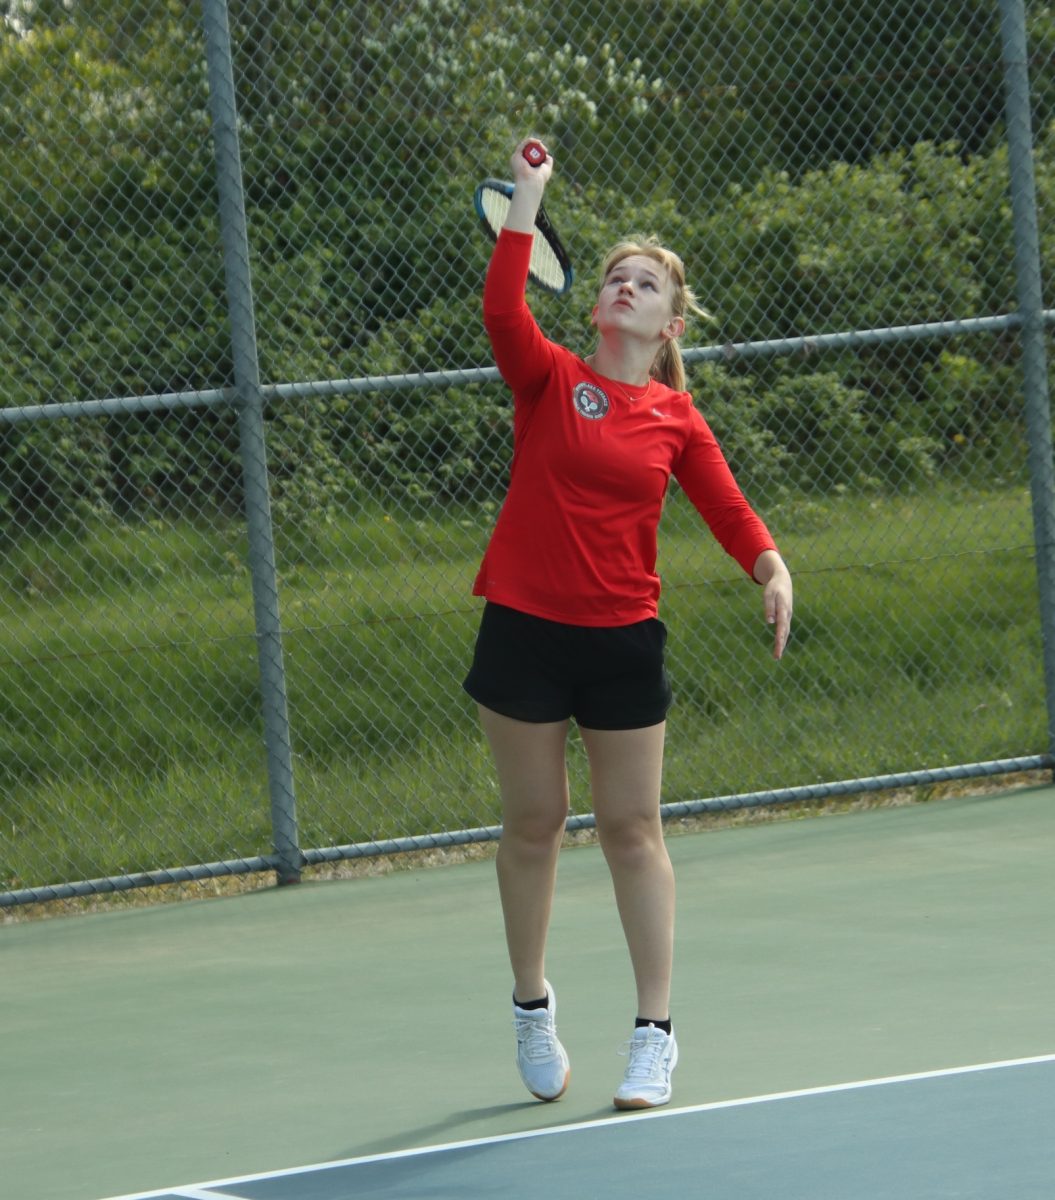 Senior+Angela+Grachev+keeping+an+eye+on+the+ball+as+she+goes+to+serve+during+a+tennis+match.